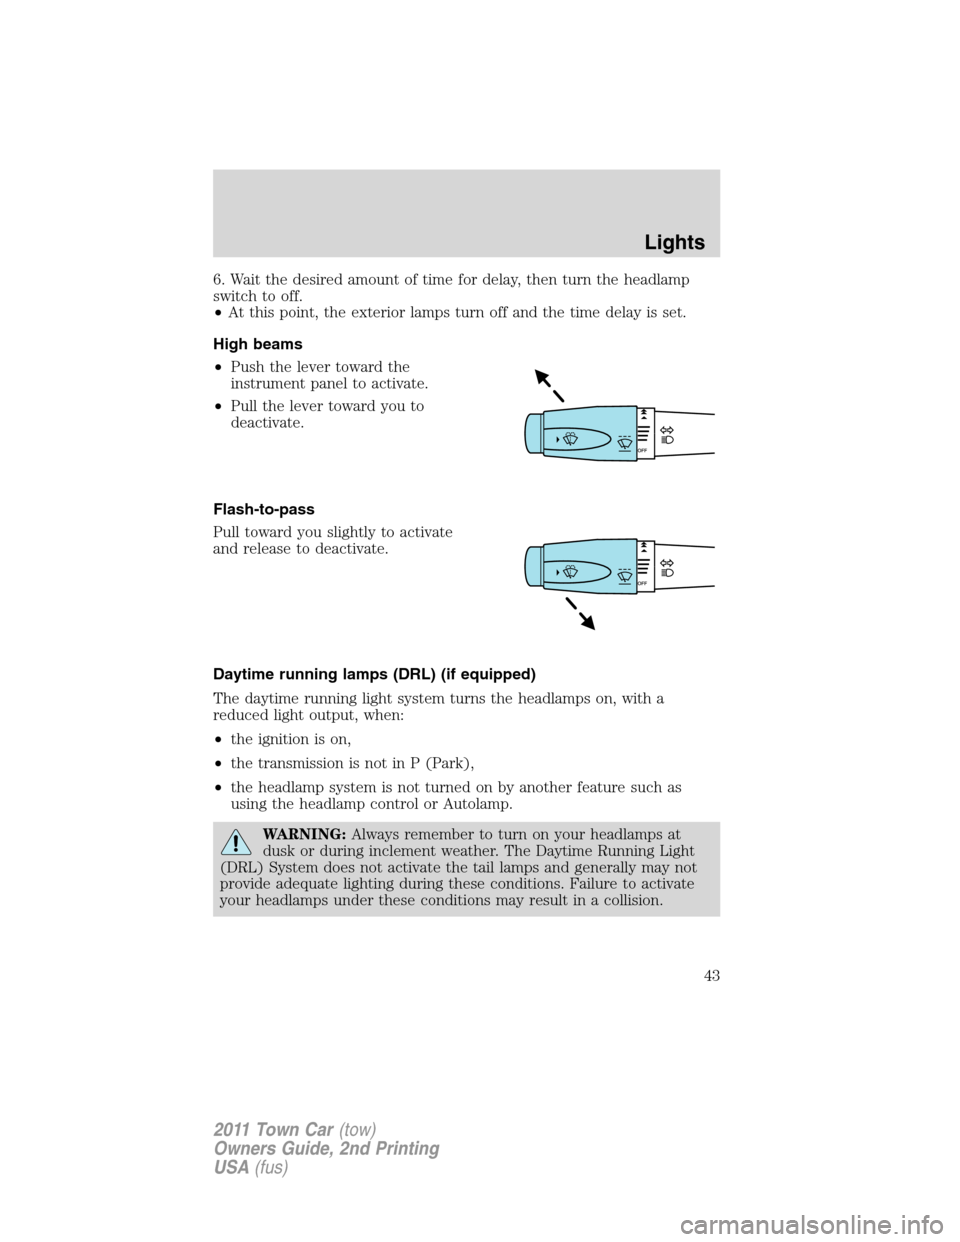 LINCOLN TOWN CAR 2011 Service Manual 6. Wait the desired amount of time for delay, then turn the headlamp
switch to off.
•At this point, the exterior lamps turn off and the time delay is set.
High beams
•Push the lever toward the
ins